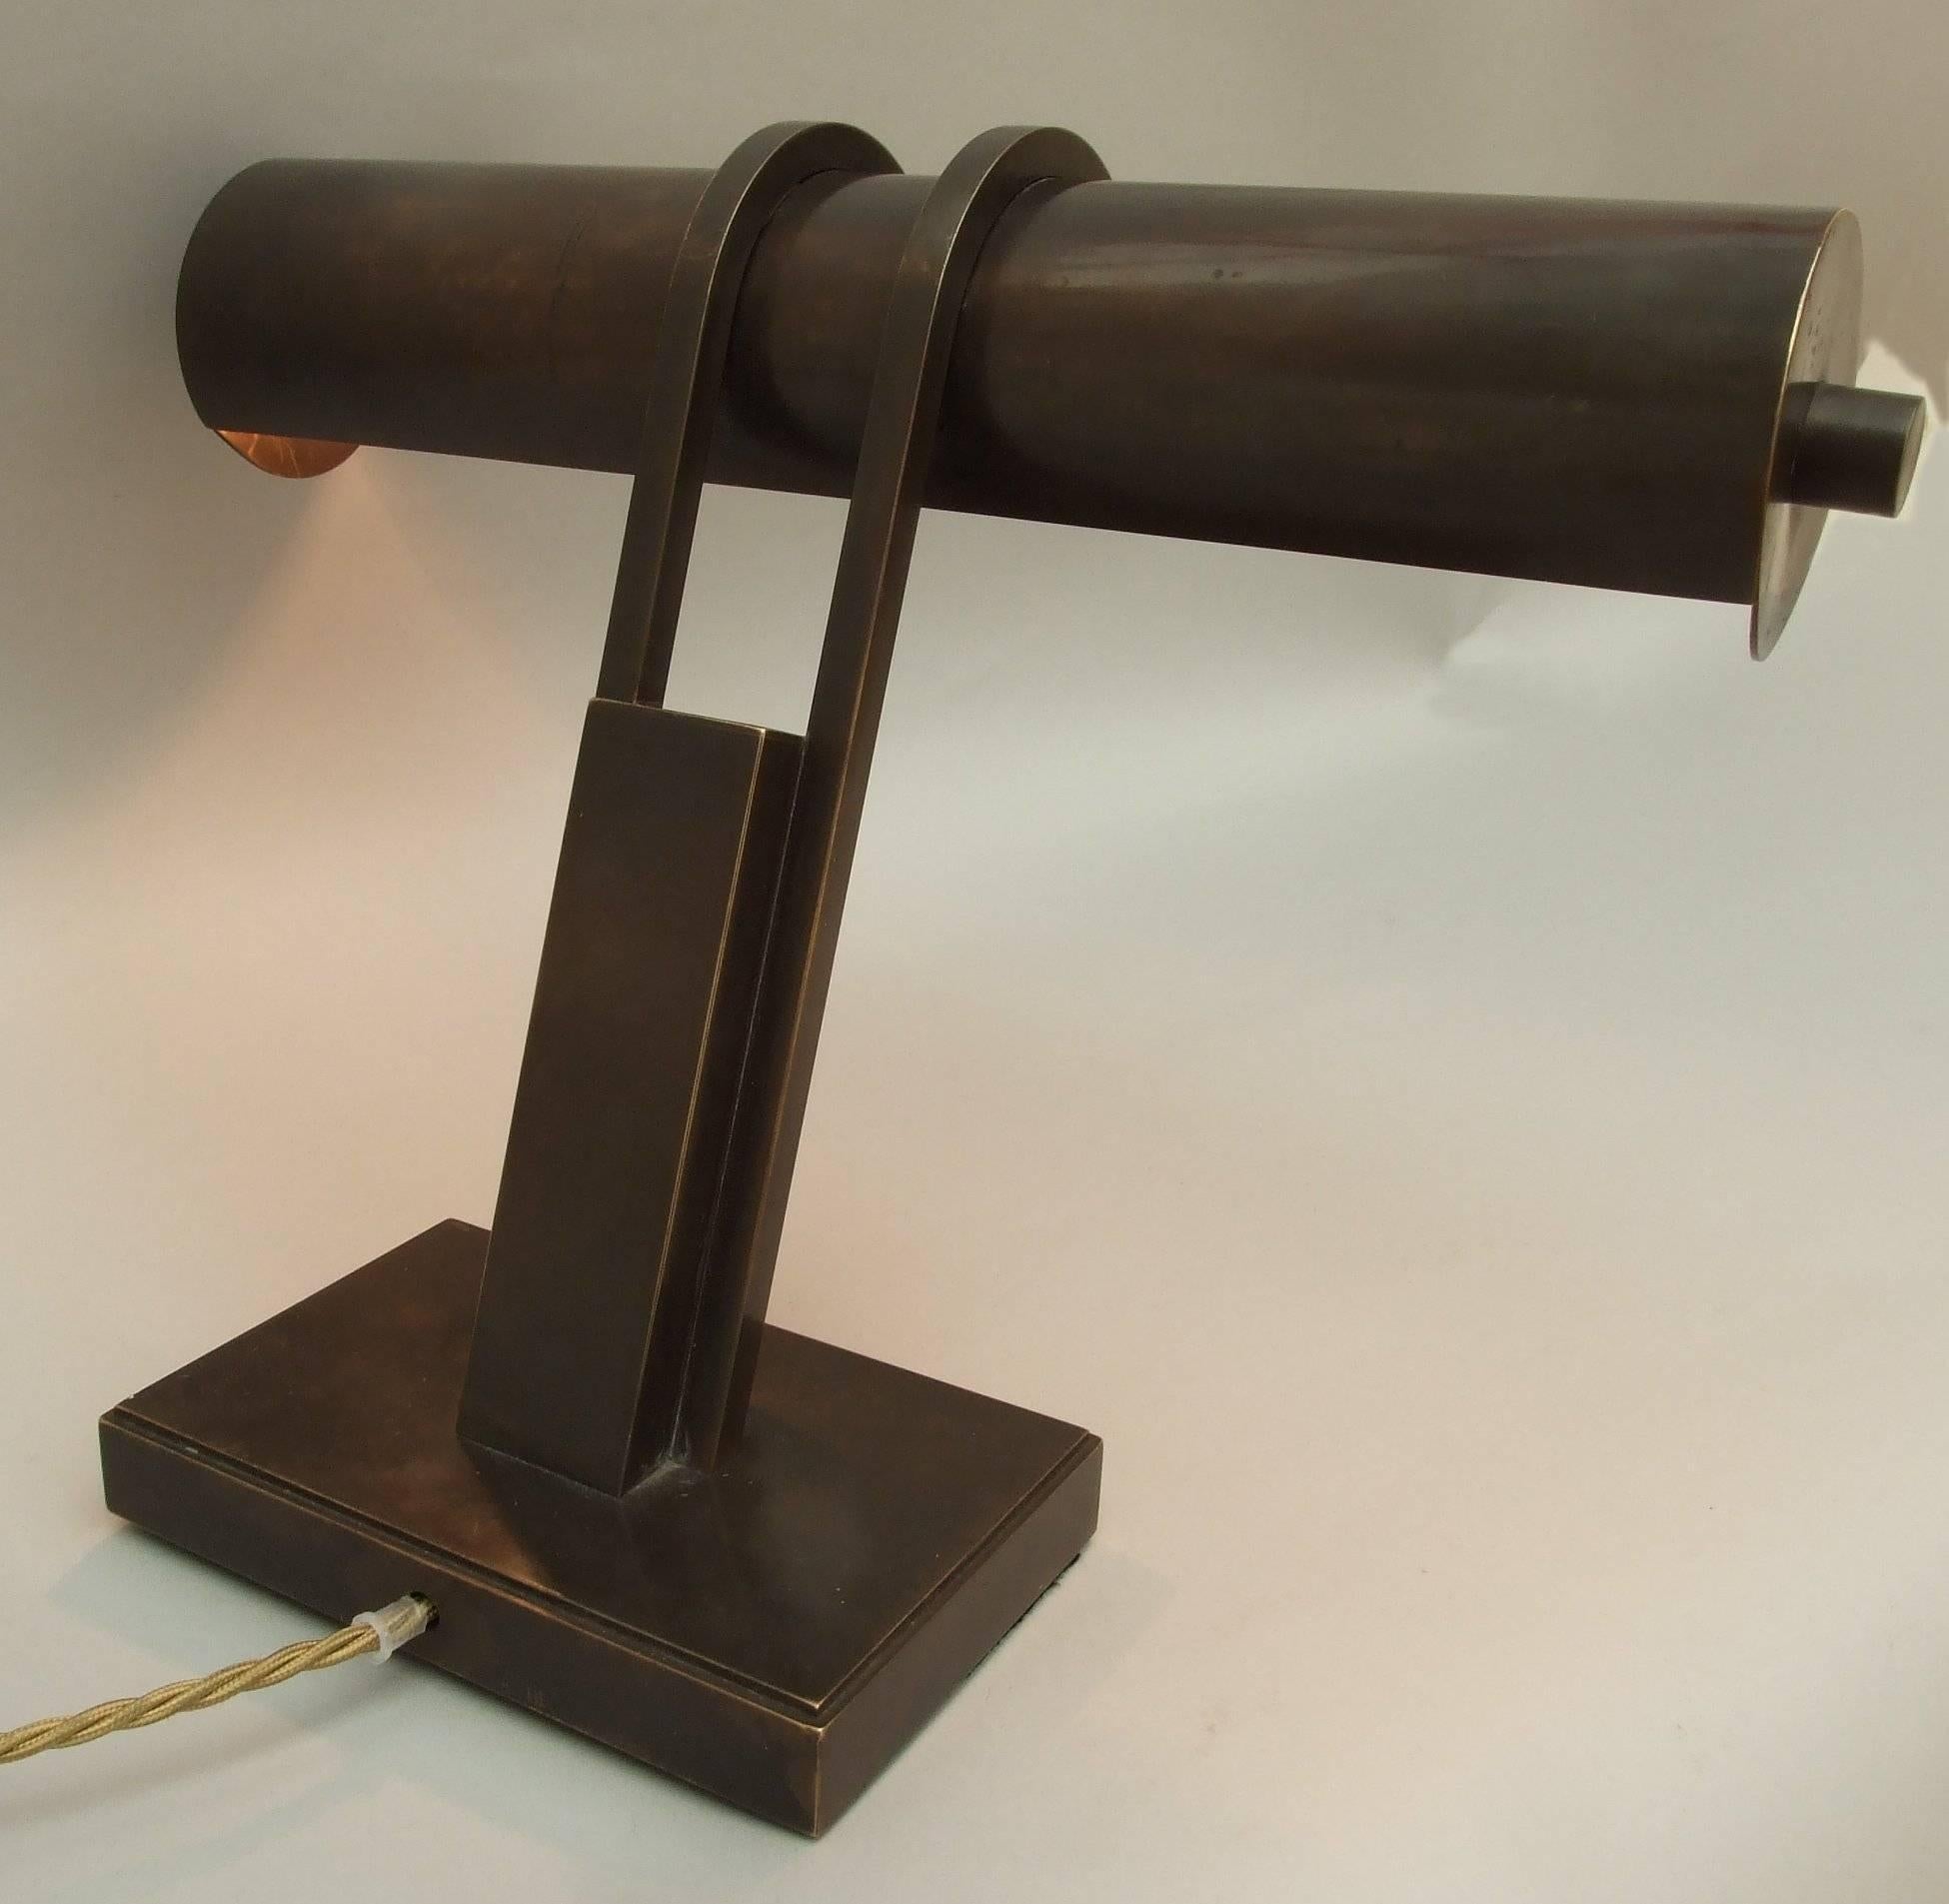 An Art Deco bronze angled desk lamp, re-wired, possibly American, circa 1935, 25.5cm (10in) high.